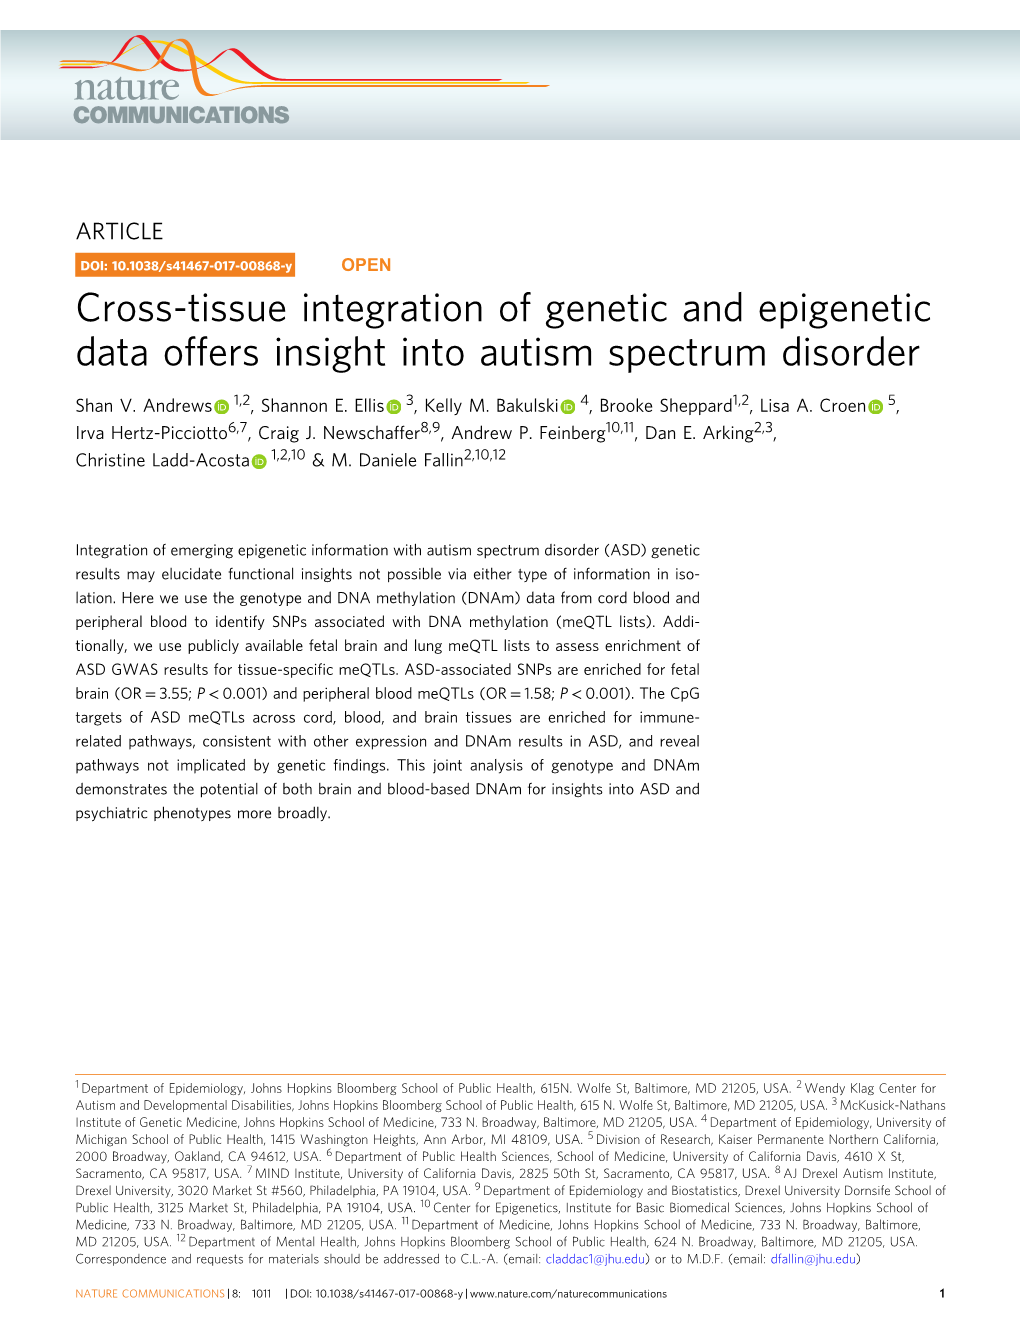 Cross-Tissue Integration of Genetic and Epigenetic Data Offers Insight Into Autism Spectrum Disorder